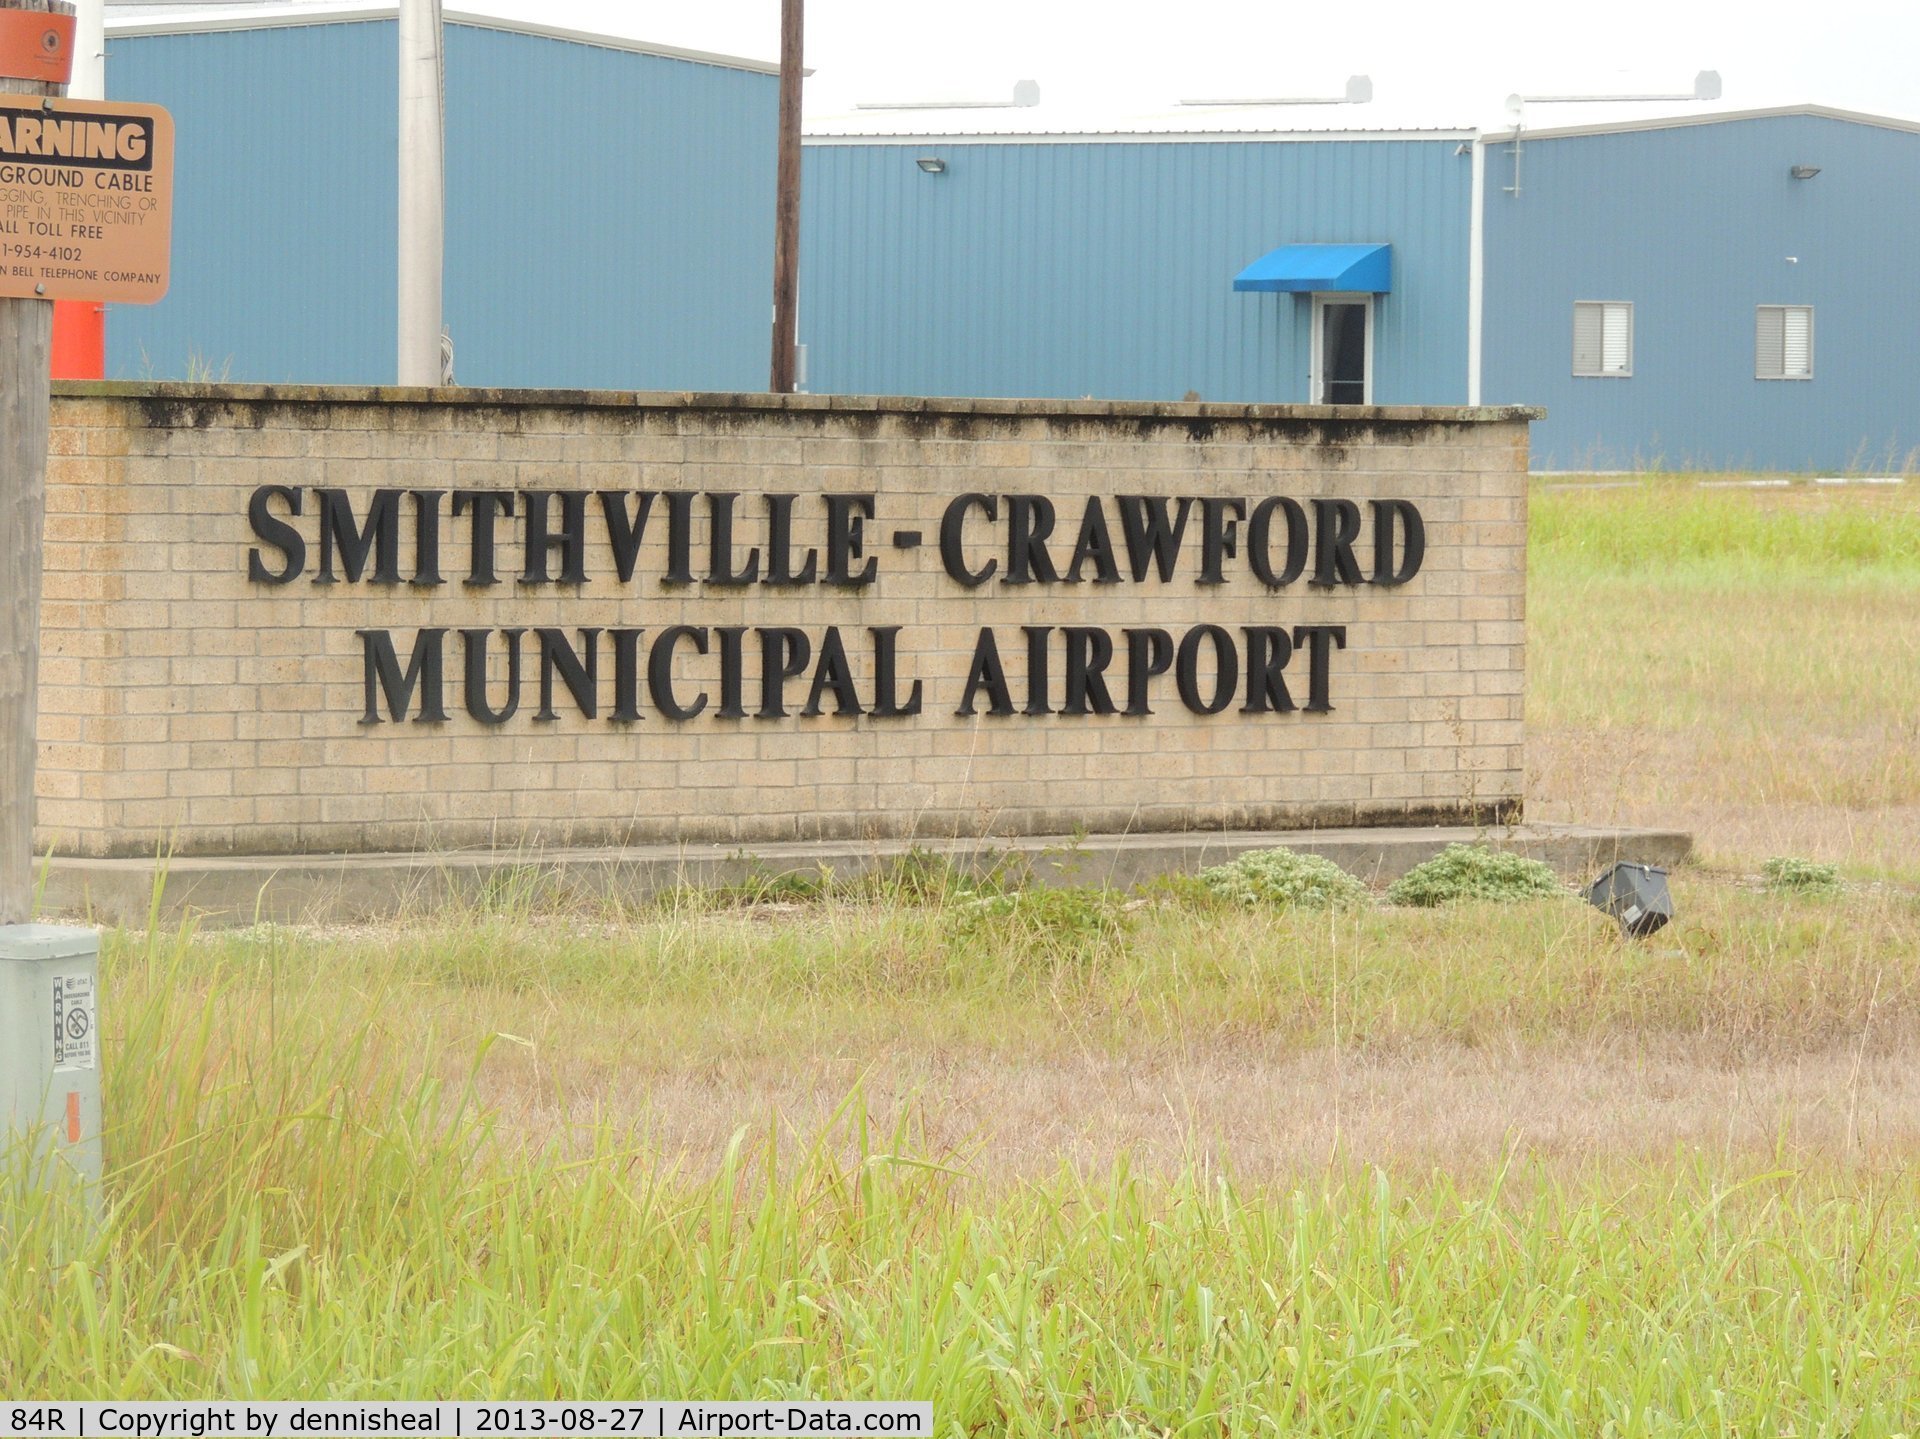 Smithville Crawford Municipal Airport (84R) - SIGN AT ENTRANCE TO SMITHVILLE-CRAWFORD MUNICIPAL AIRPORT